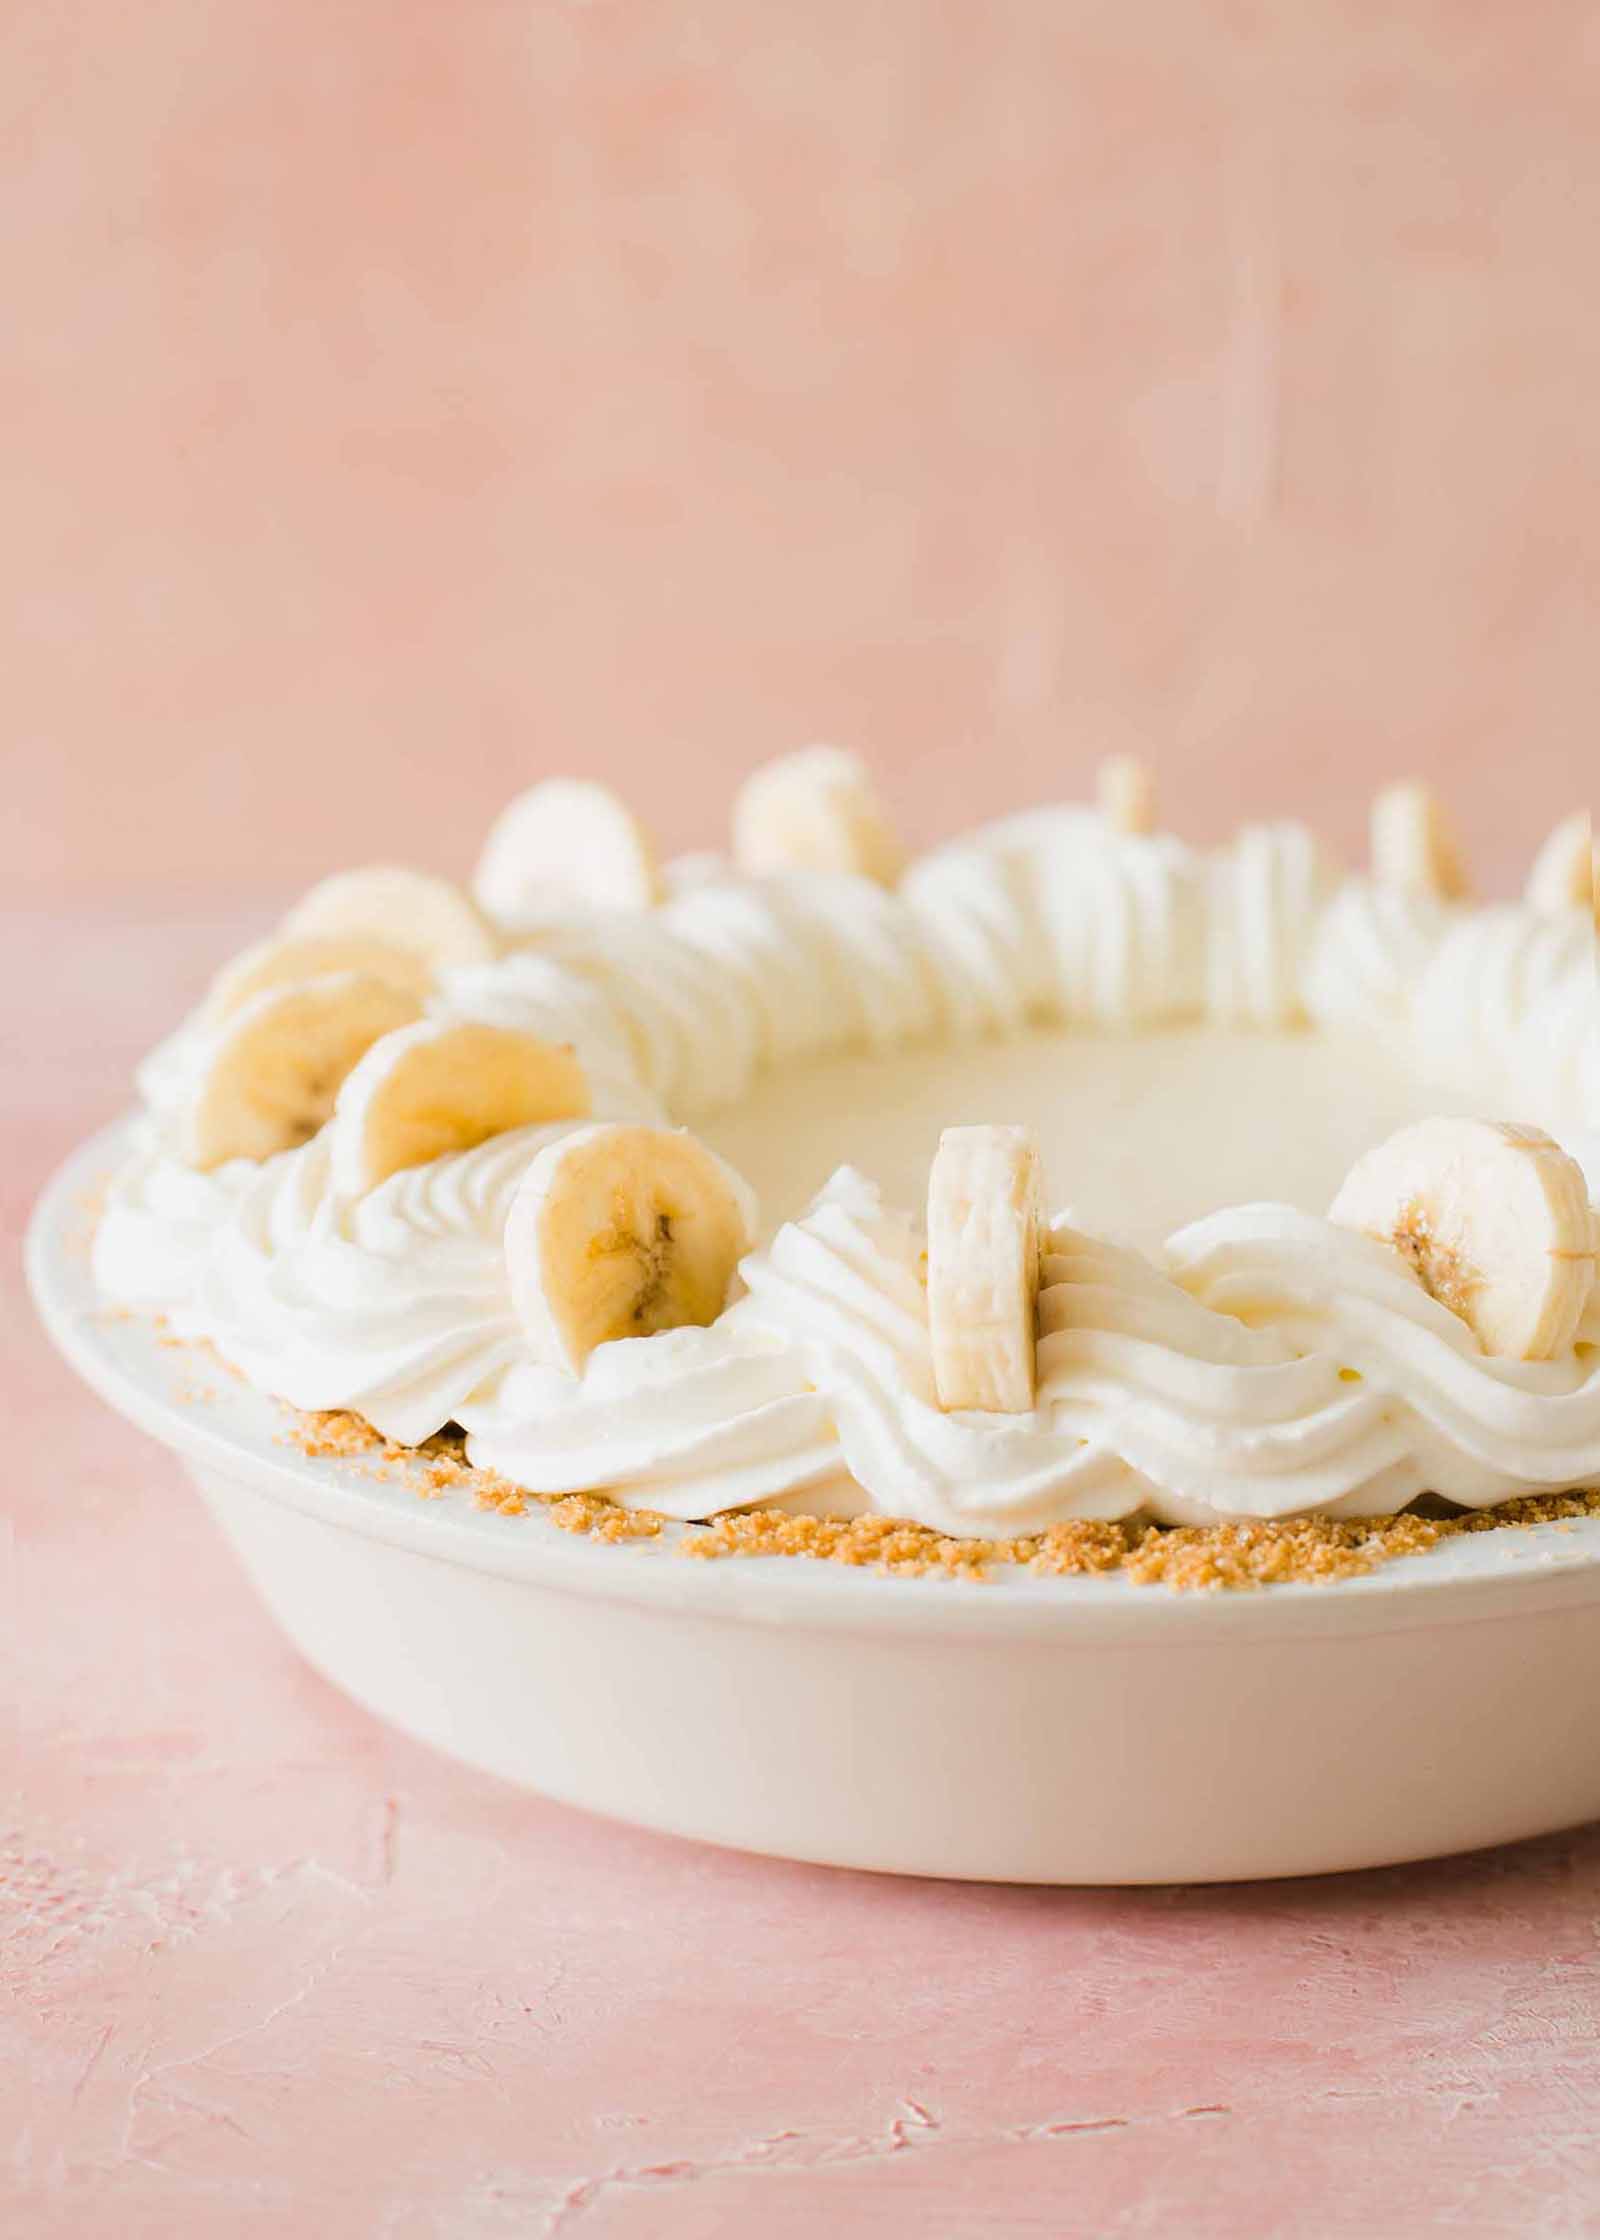 Whole banana cream pie with whipped cream swirls on top and banana slices set against a pink background.